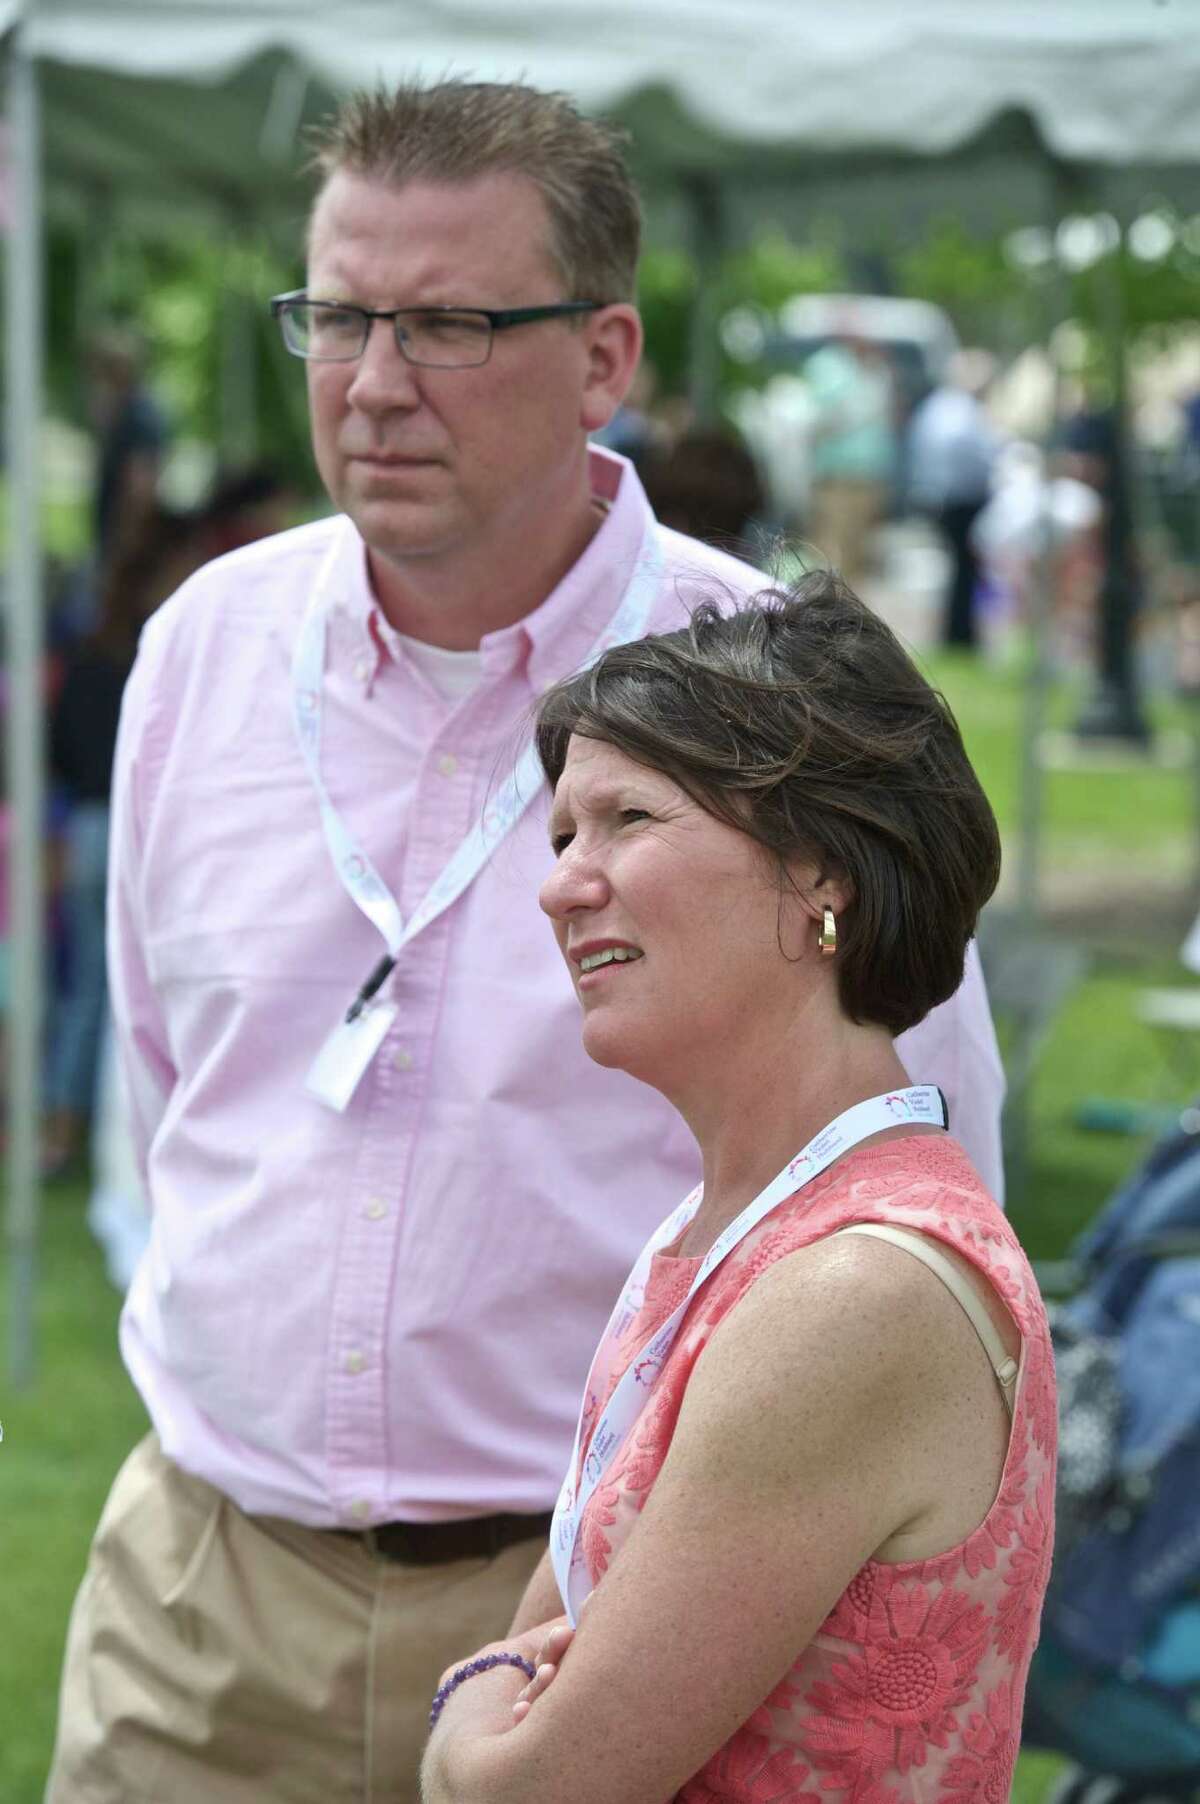 Jenny and Matt Hubbard attended the Catherine Violet Hubbard Foundation's second annual "Butterfly Party"on Saturday, June 6, 2015. The party, a community event, honors their daughter Catherine Violet Hubbard, one of the students lost in the Sandy Hook Elementary School shooting. Saturday, June 6, 2015, in Newtown, Conn.